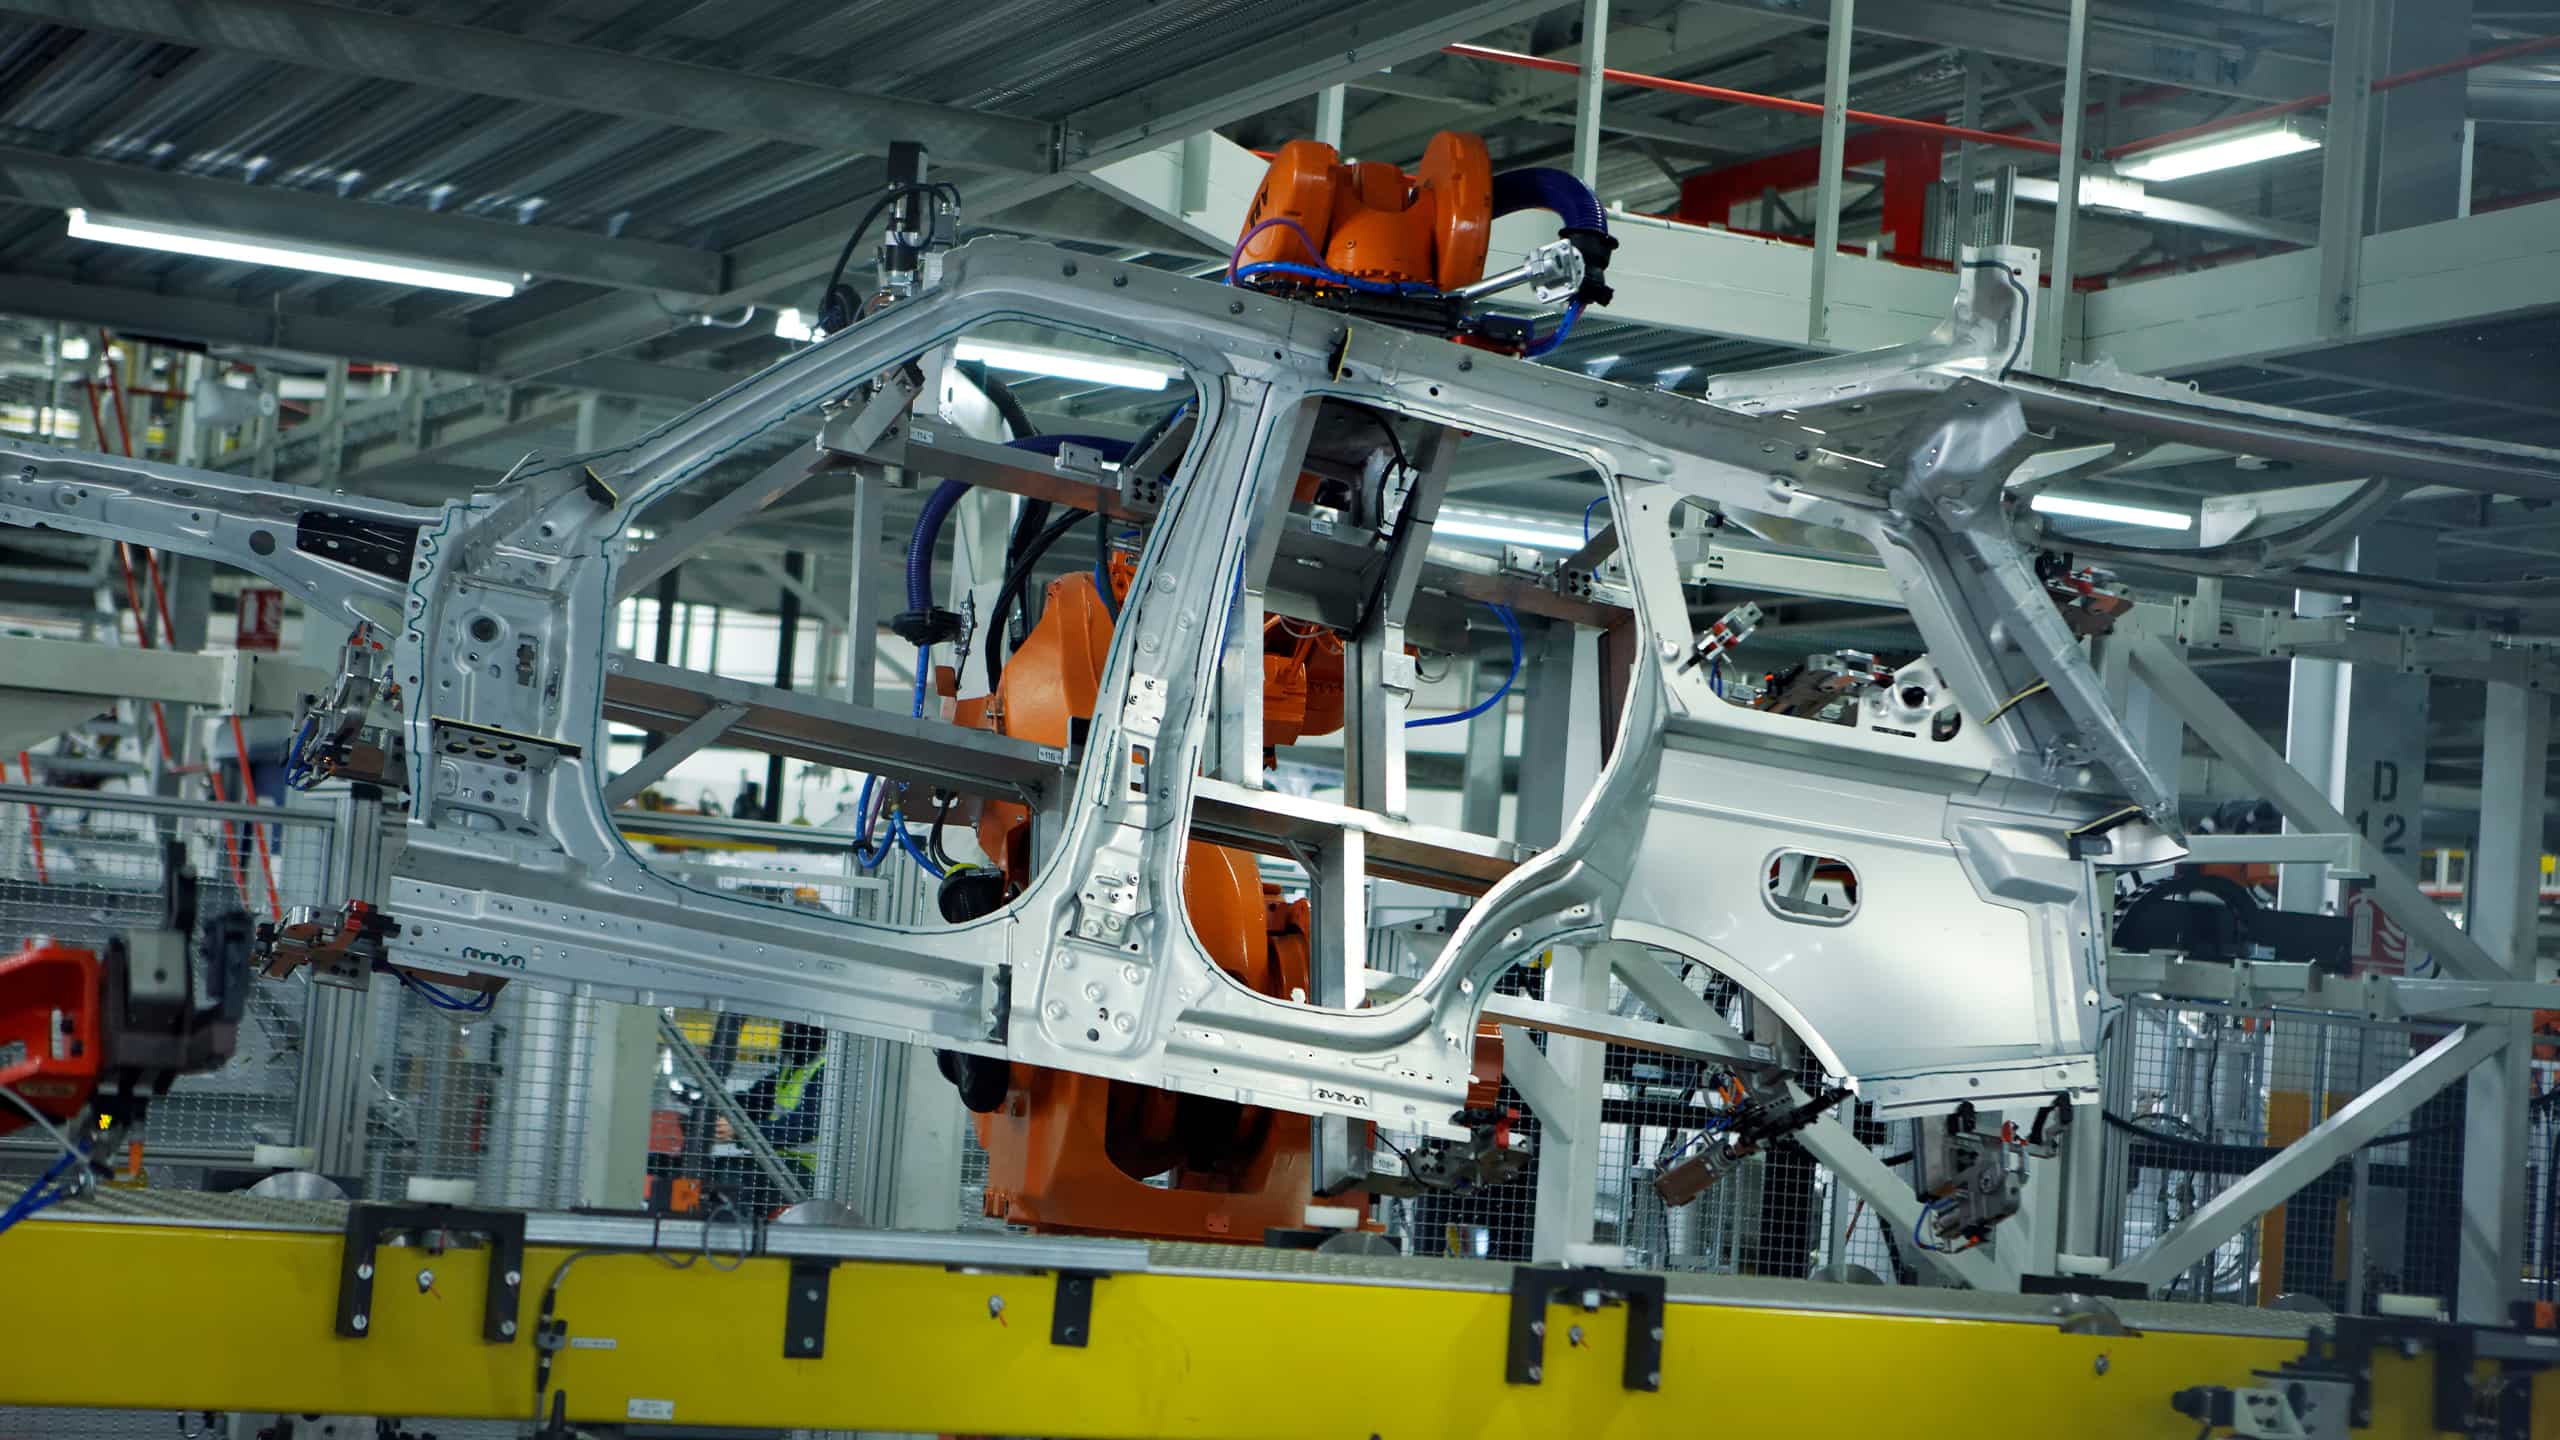 Range Rover manufacturing production unit